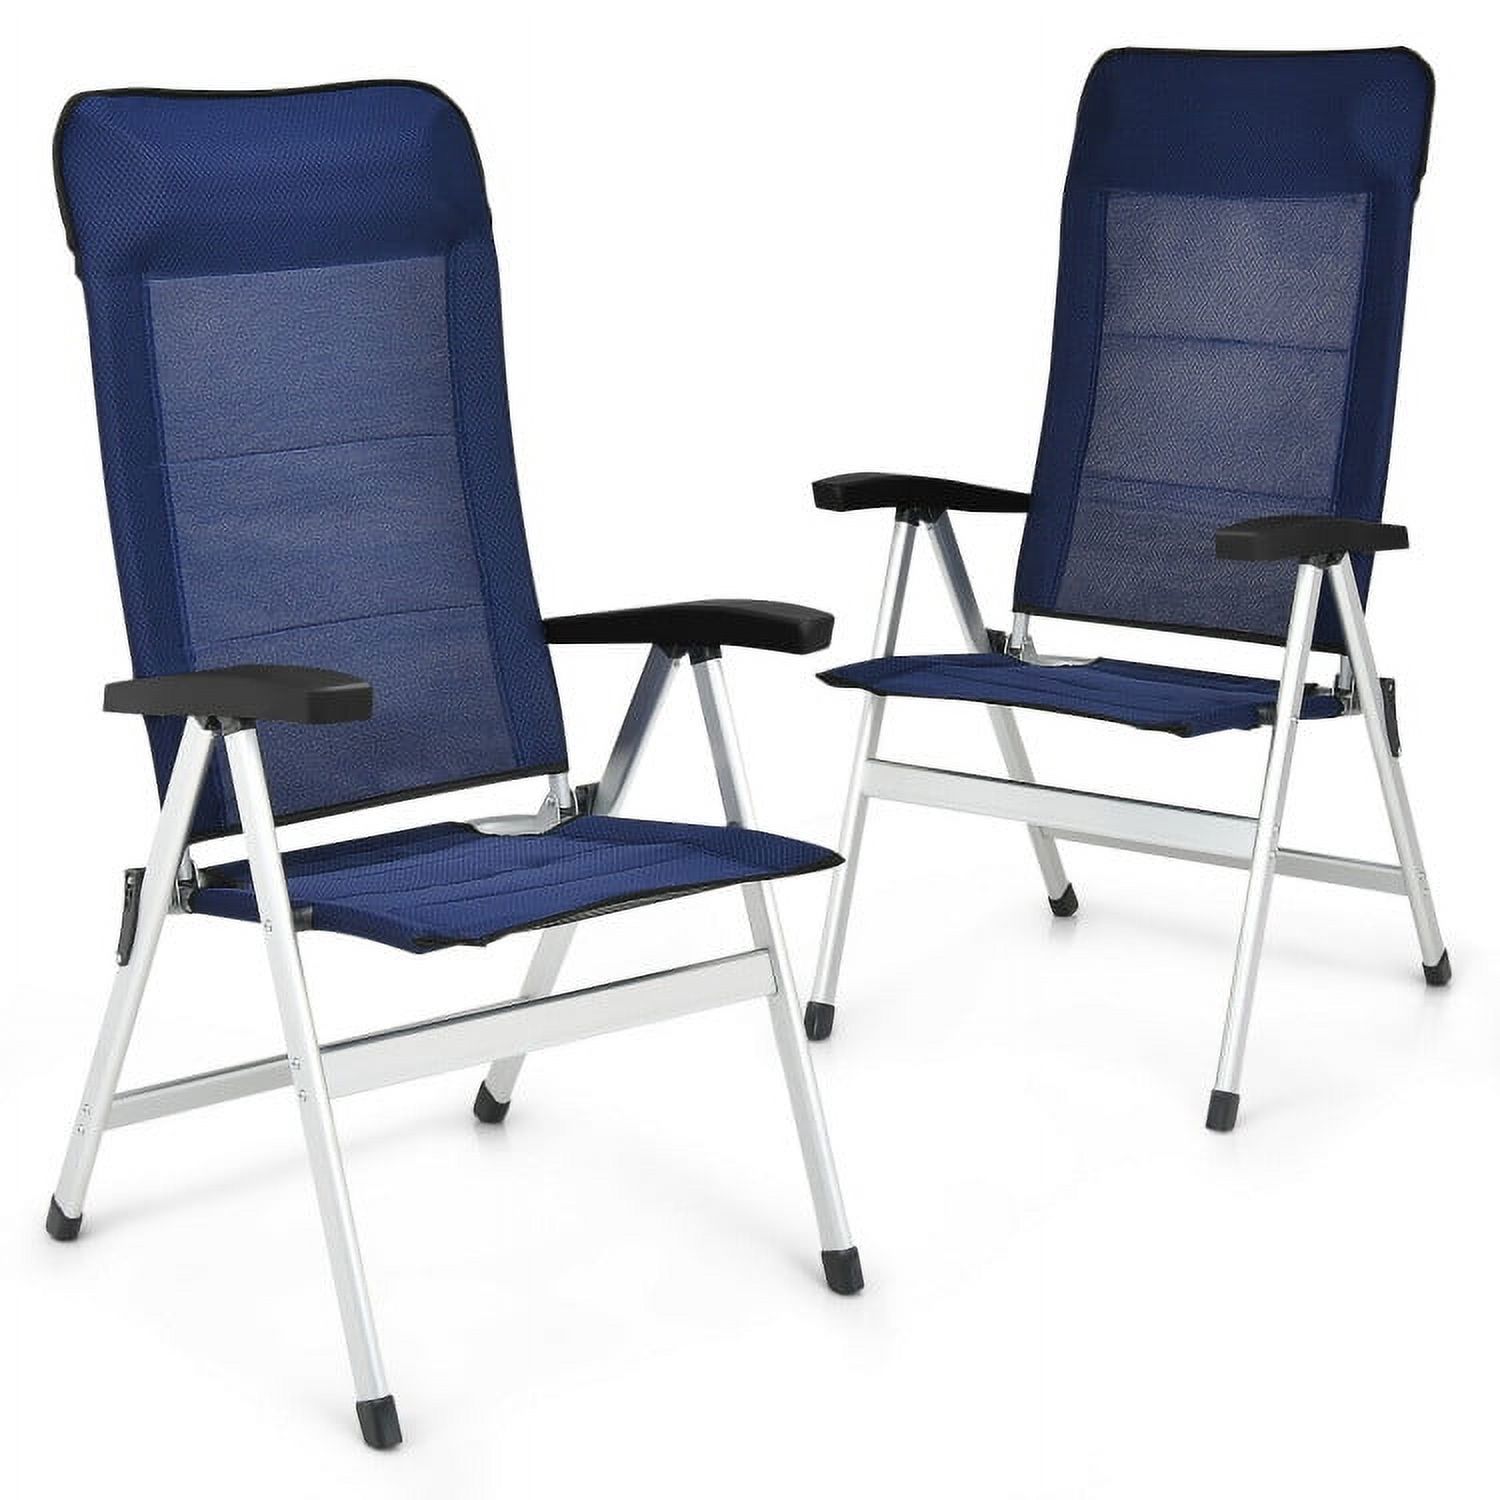 2 Pieces Patio Dining Chair with Adjust Portable Headrest - image 1 of 6